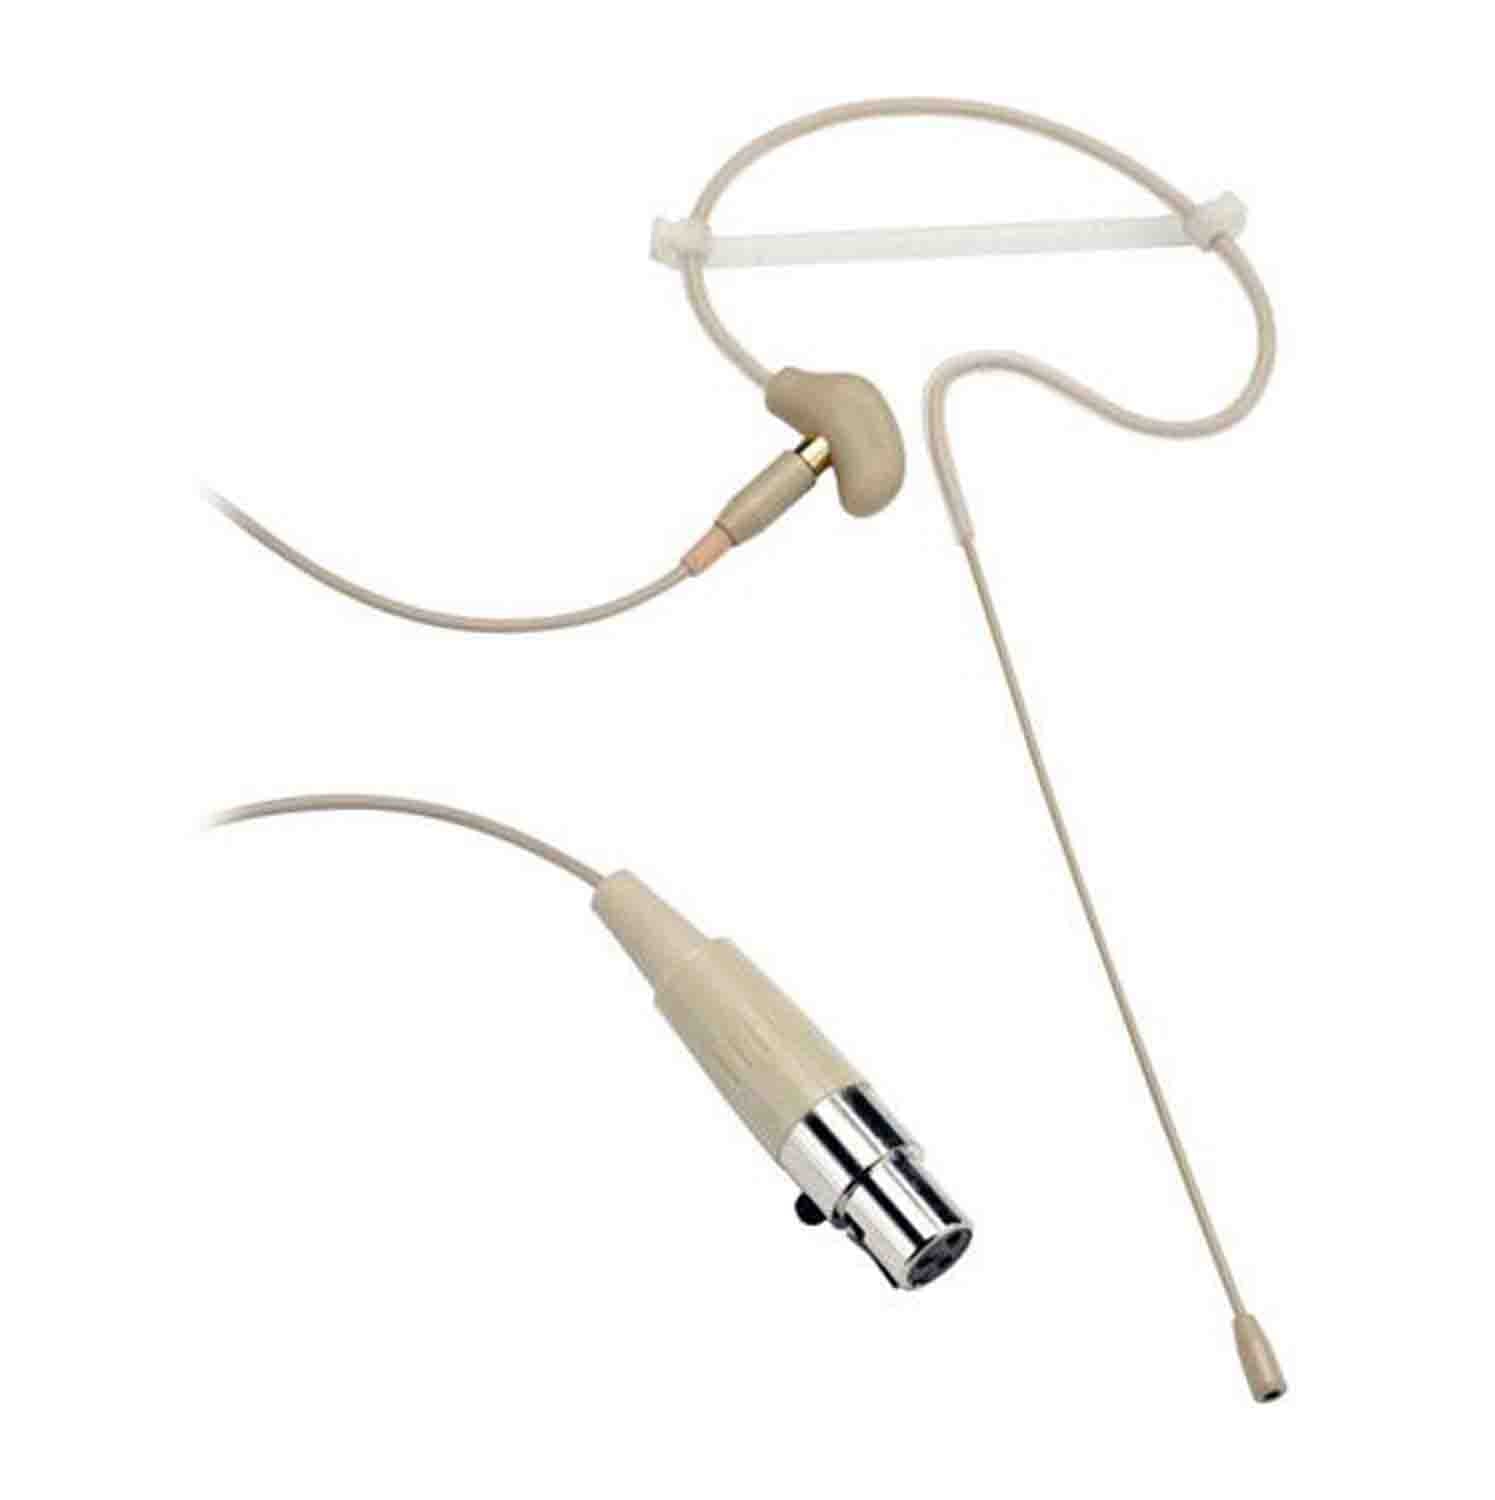 Samson SWA3CS, SE10T Omnidirectional Earset and EC10TX cable with P3 Connector - Beige - Hollywood DJ